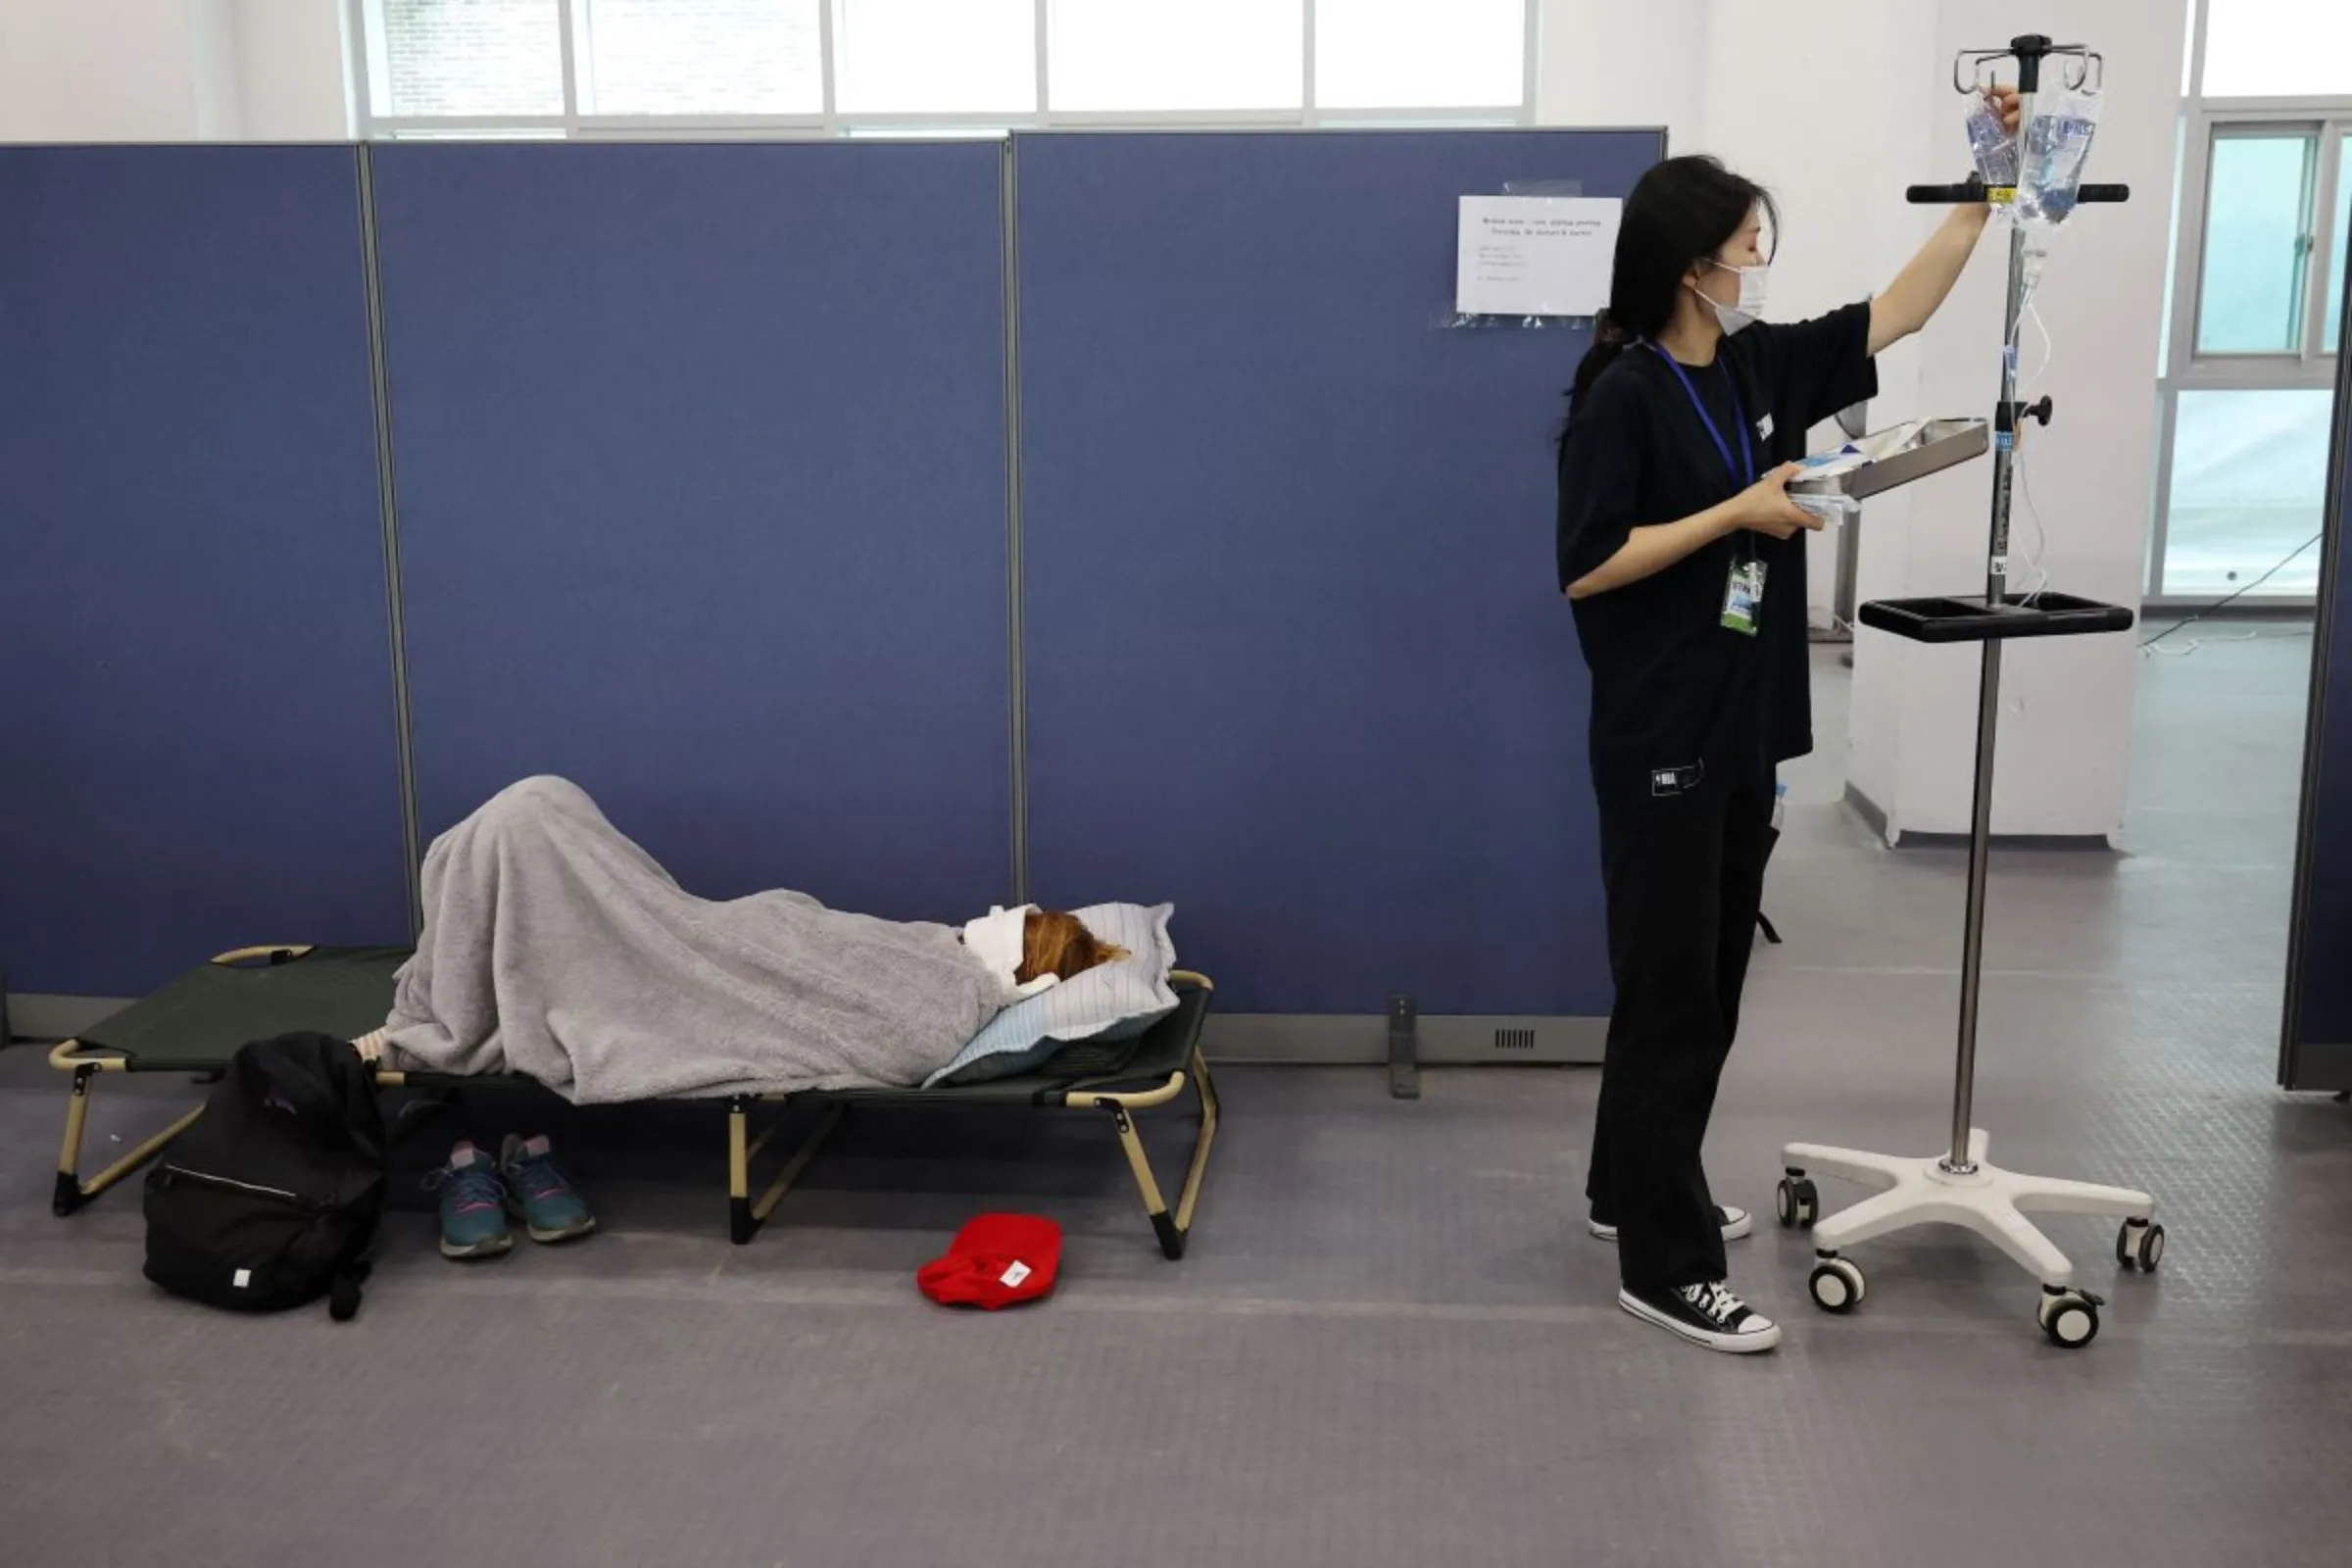 A participant receives medical treatment at Jamboree Hospital during the 25th World Scout Jamboree in Buan, South Korea